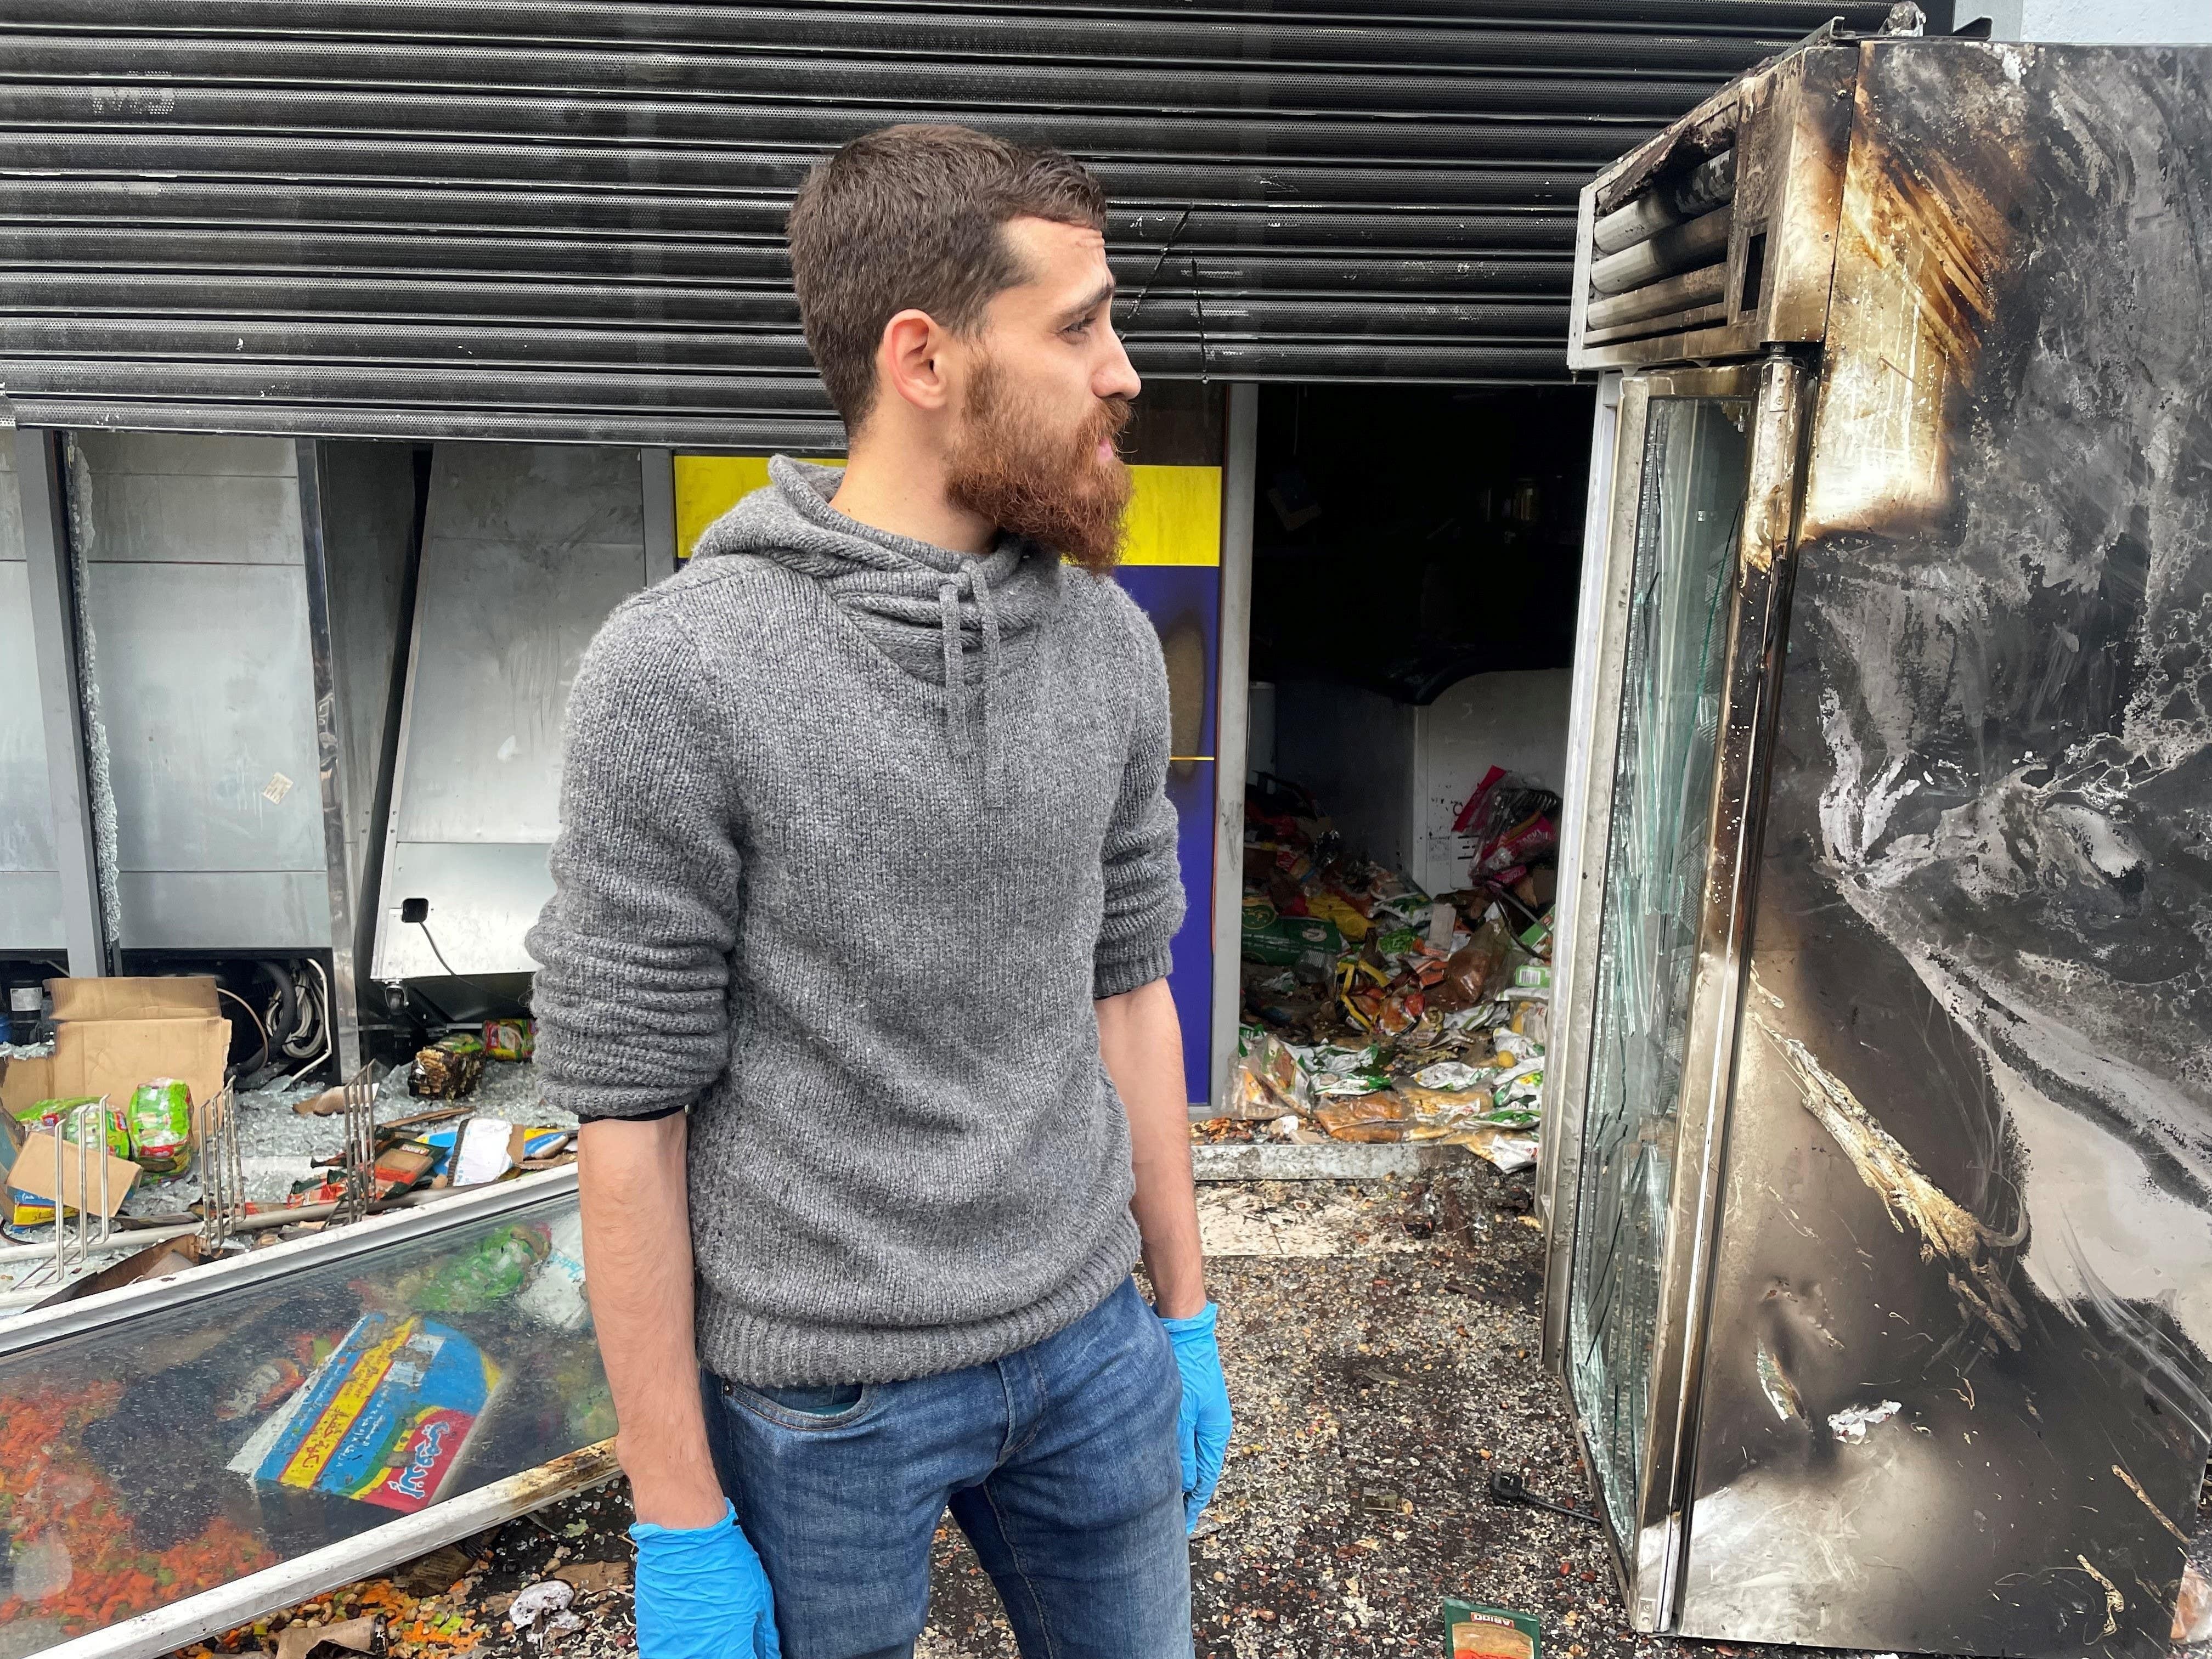 ‘We live in fear, we need action for change’ – worker at destroyed Belfast shop